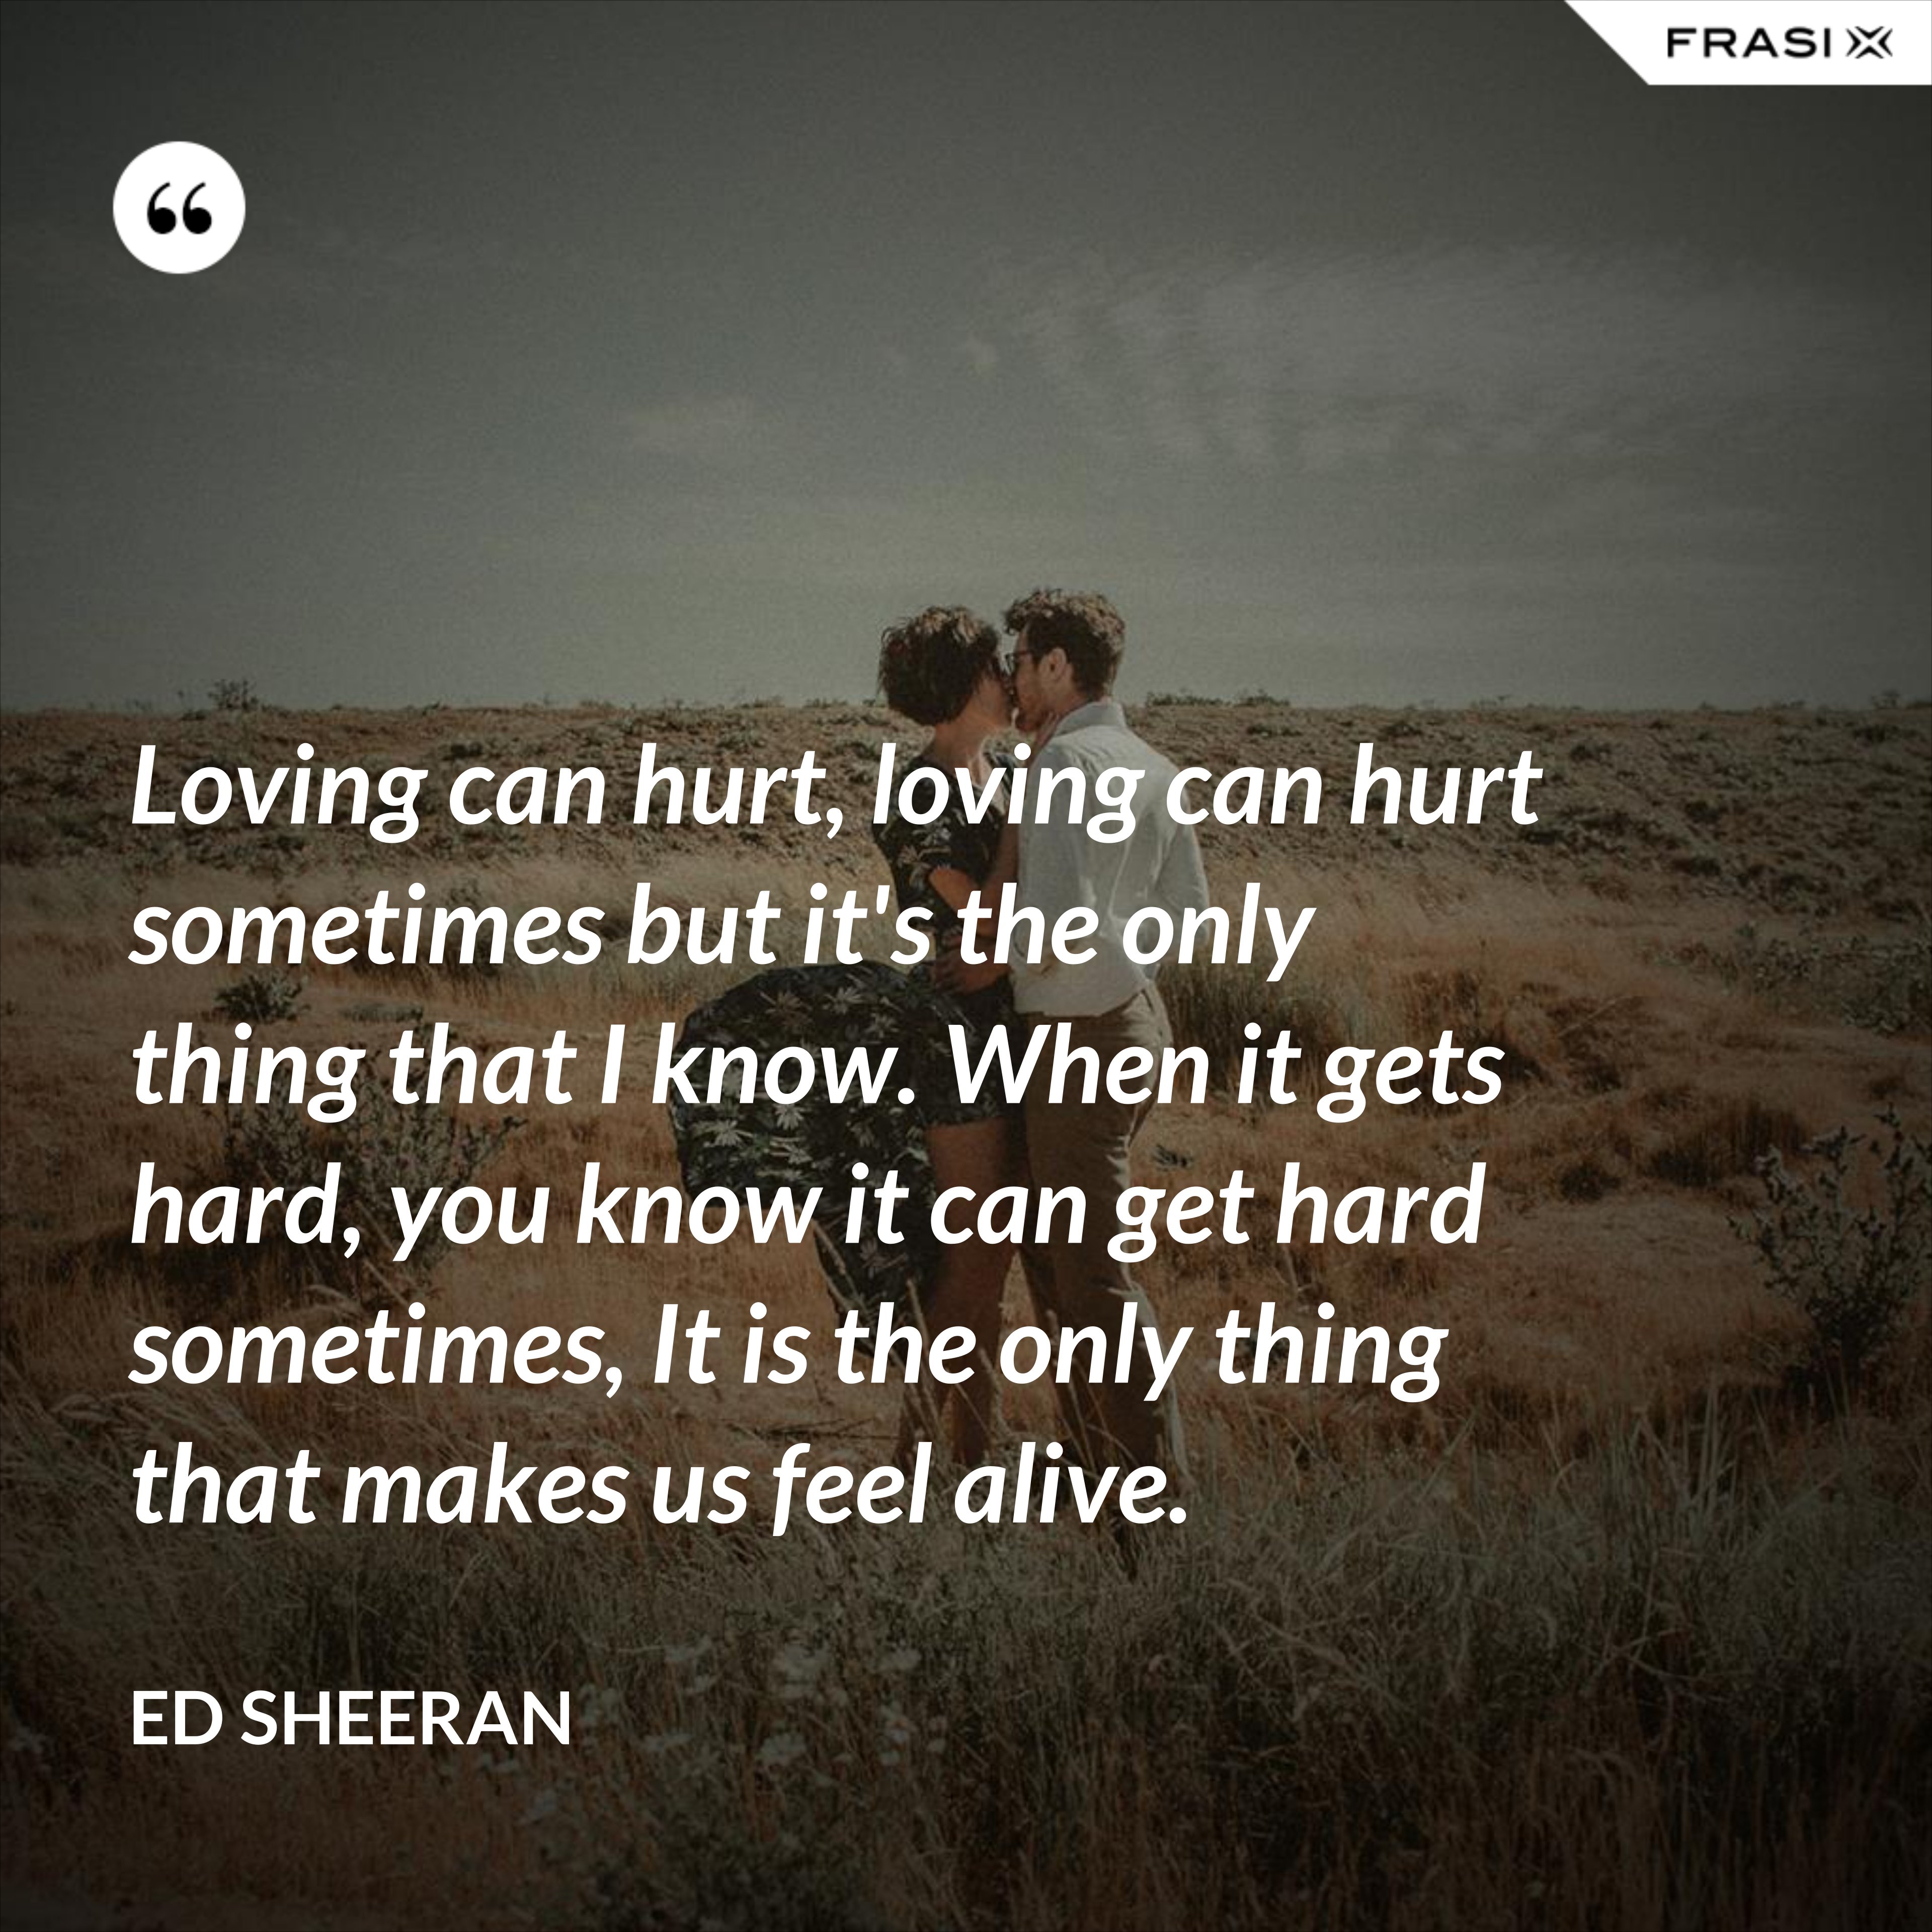 Loving can hurt, loving can hurt sometimes but it's the only thing that I know. When it gets hard, you know it can get hard sometimes, It is the only thing that makes us feel alive. - Ed Sheeran